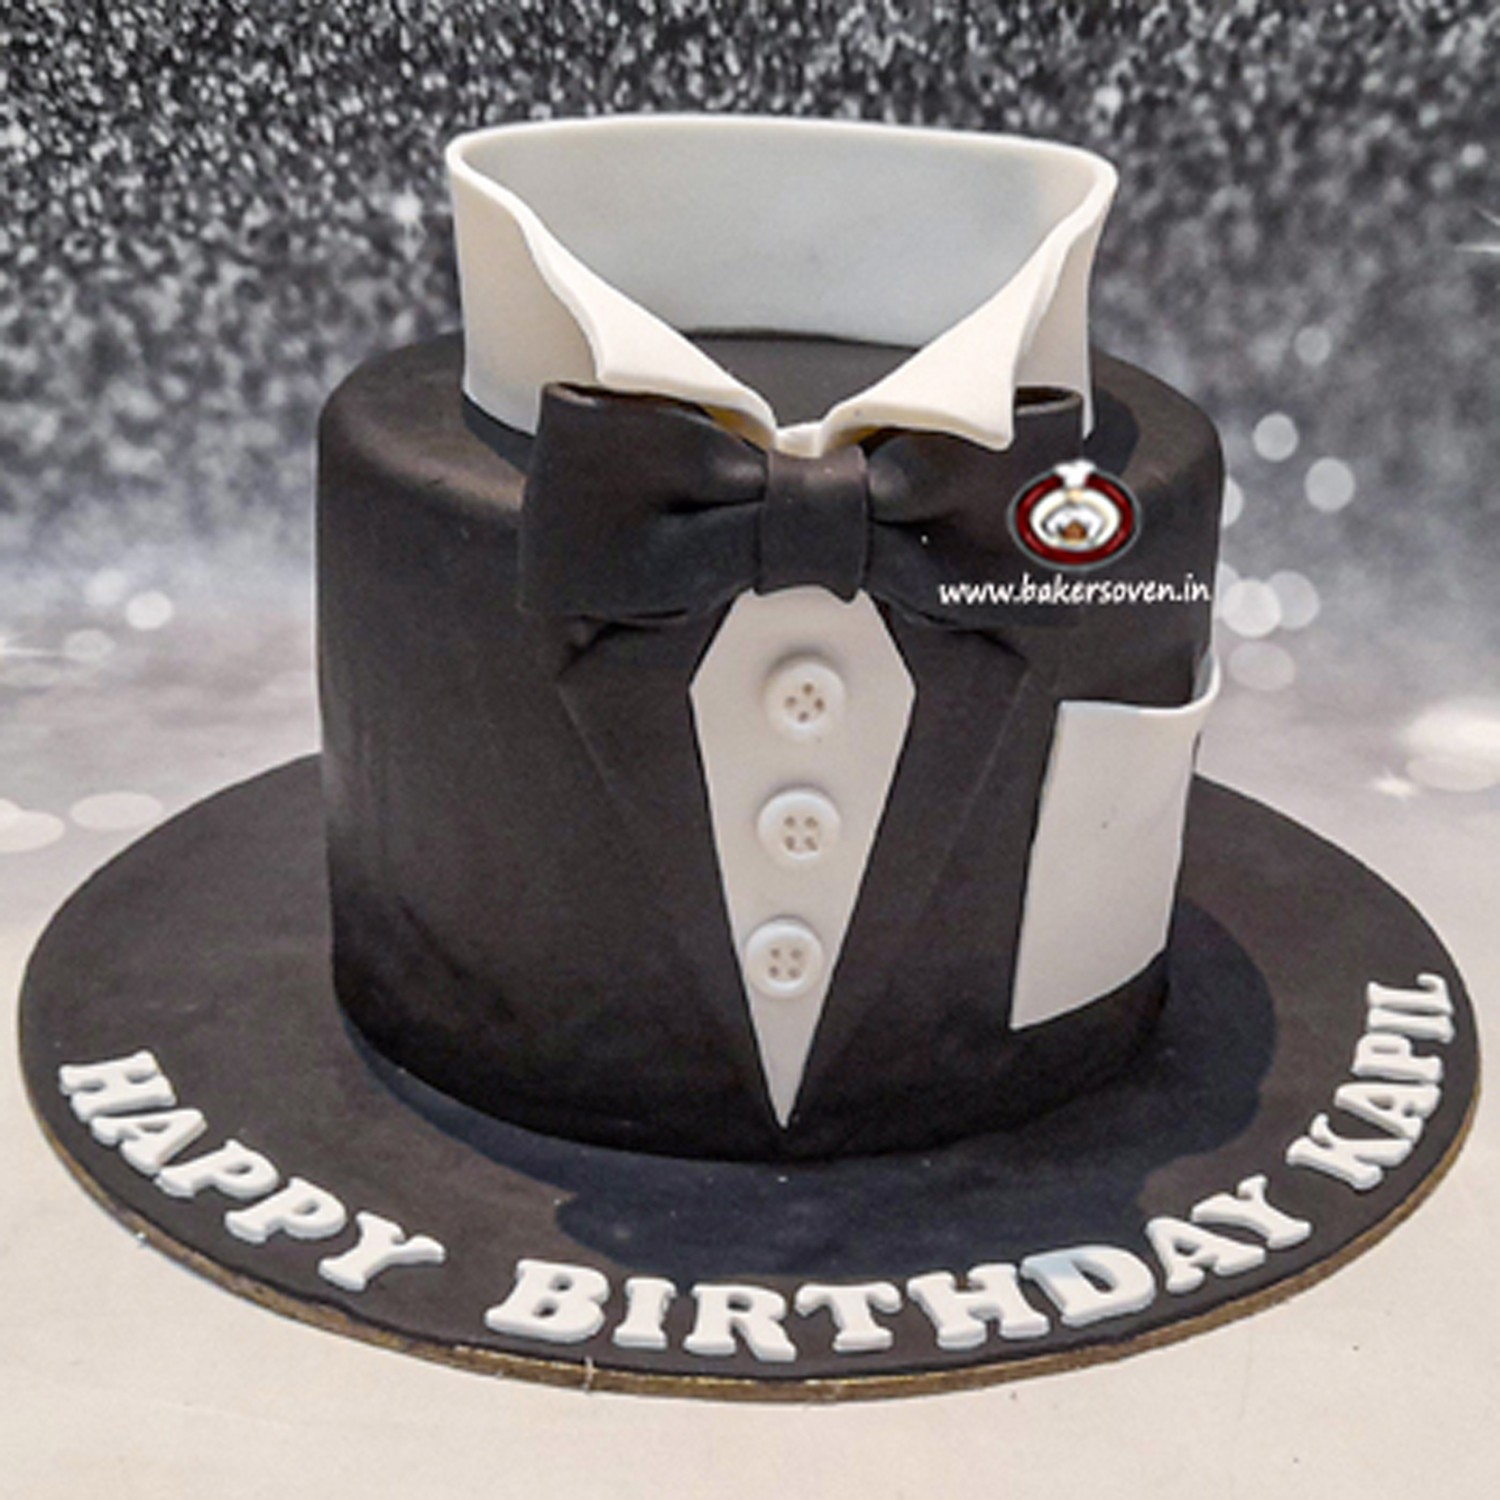 Send Birthday Cakes For Boys Online | Bakersoven